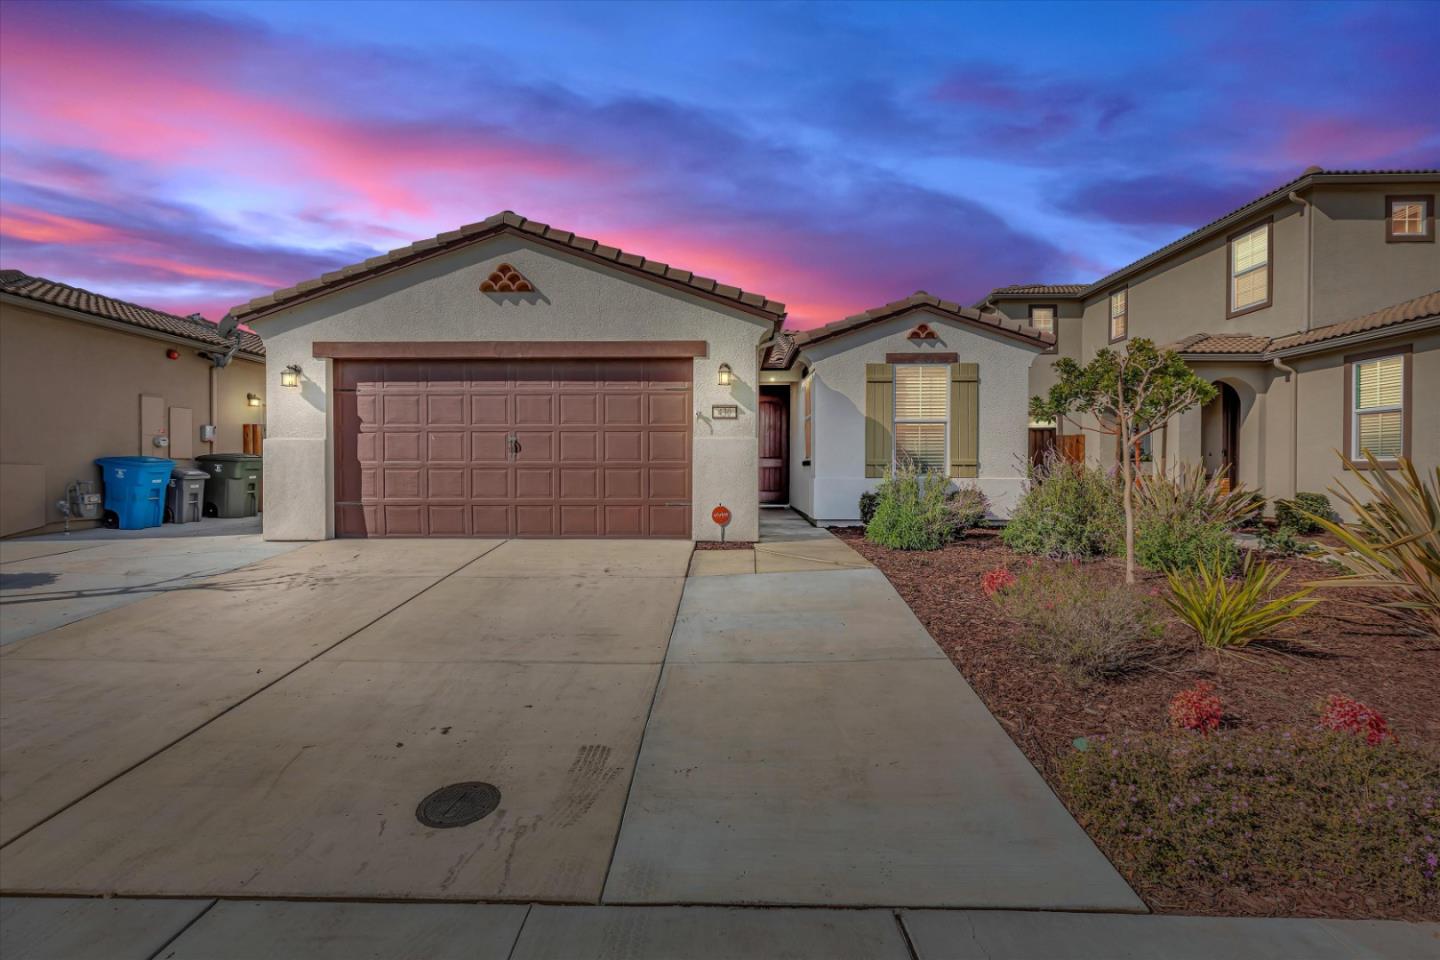 Photo of 430 Alicante Dr in Hollister, CA